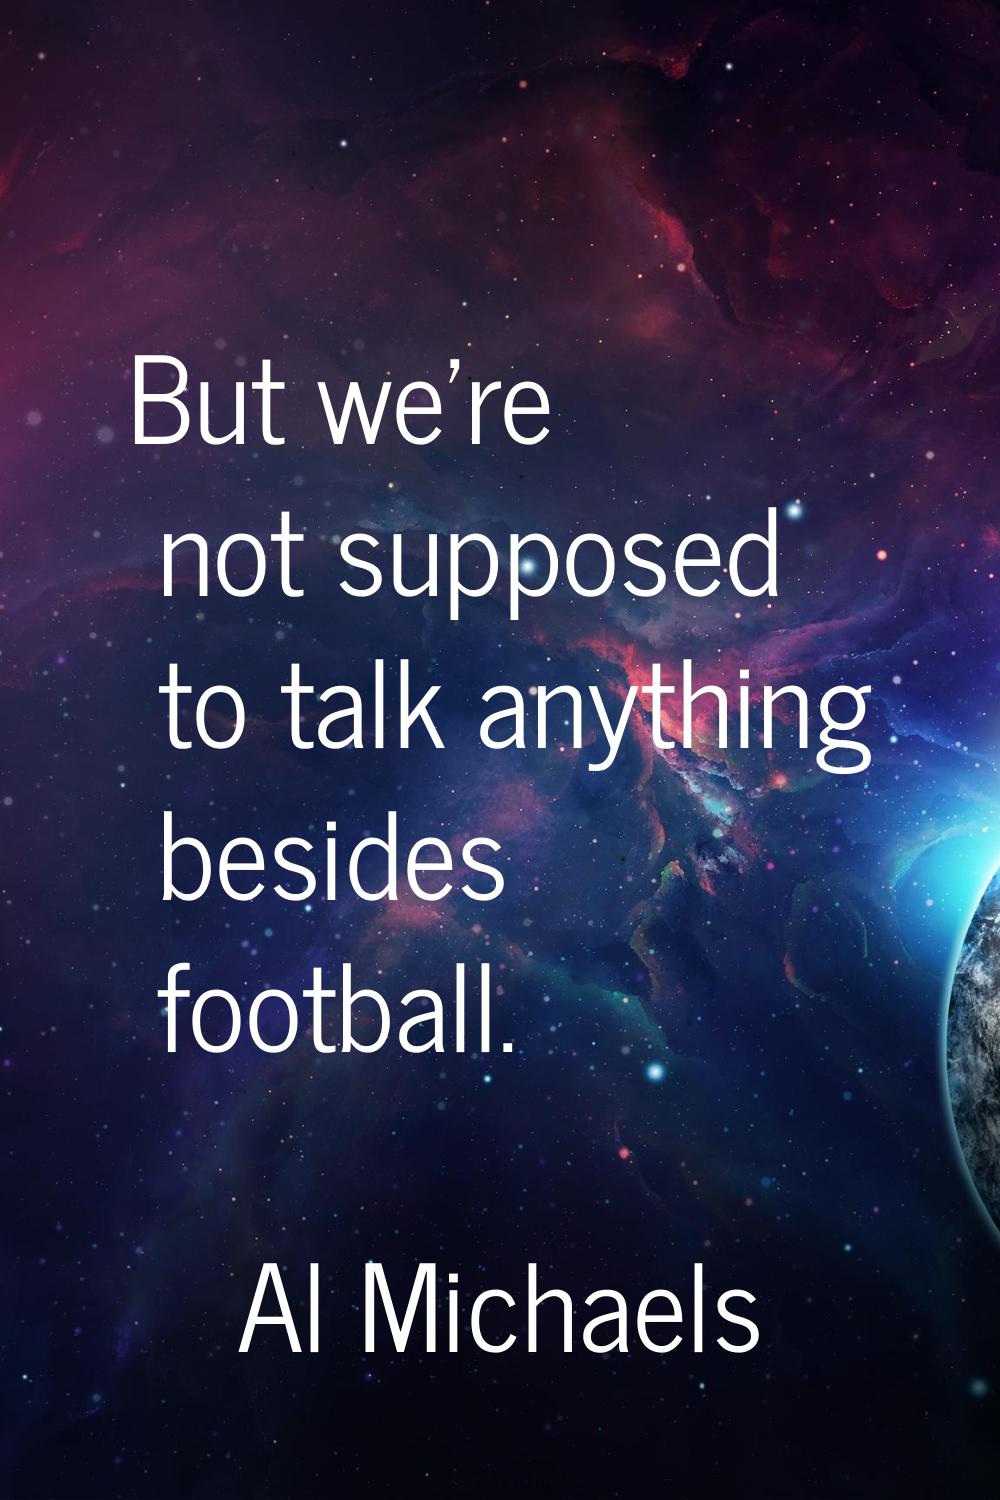 But we're not supposed to talk anything besides football.